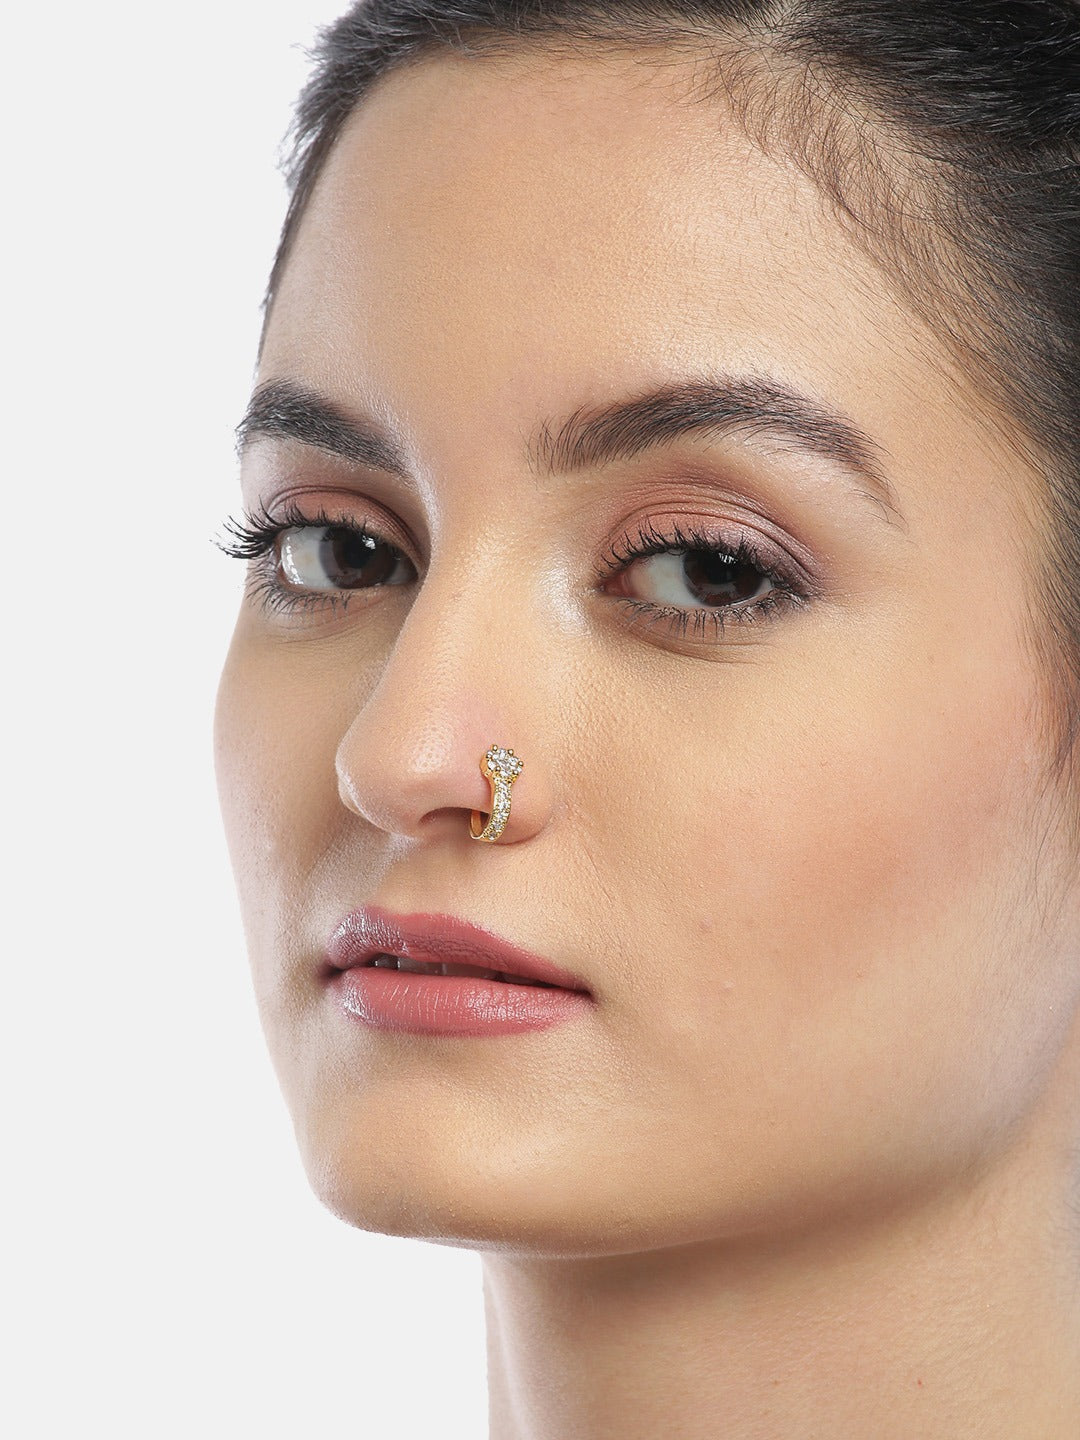 Amazon.com: Unique Nose Hoop, Gold Plated Nose Ring Piercing, Tribal Indian  Style, 20g, Handmade Body Jewelry by Alagia : Handmade Products